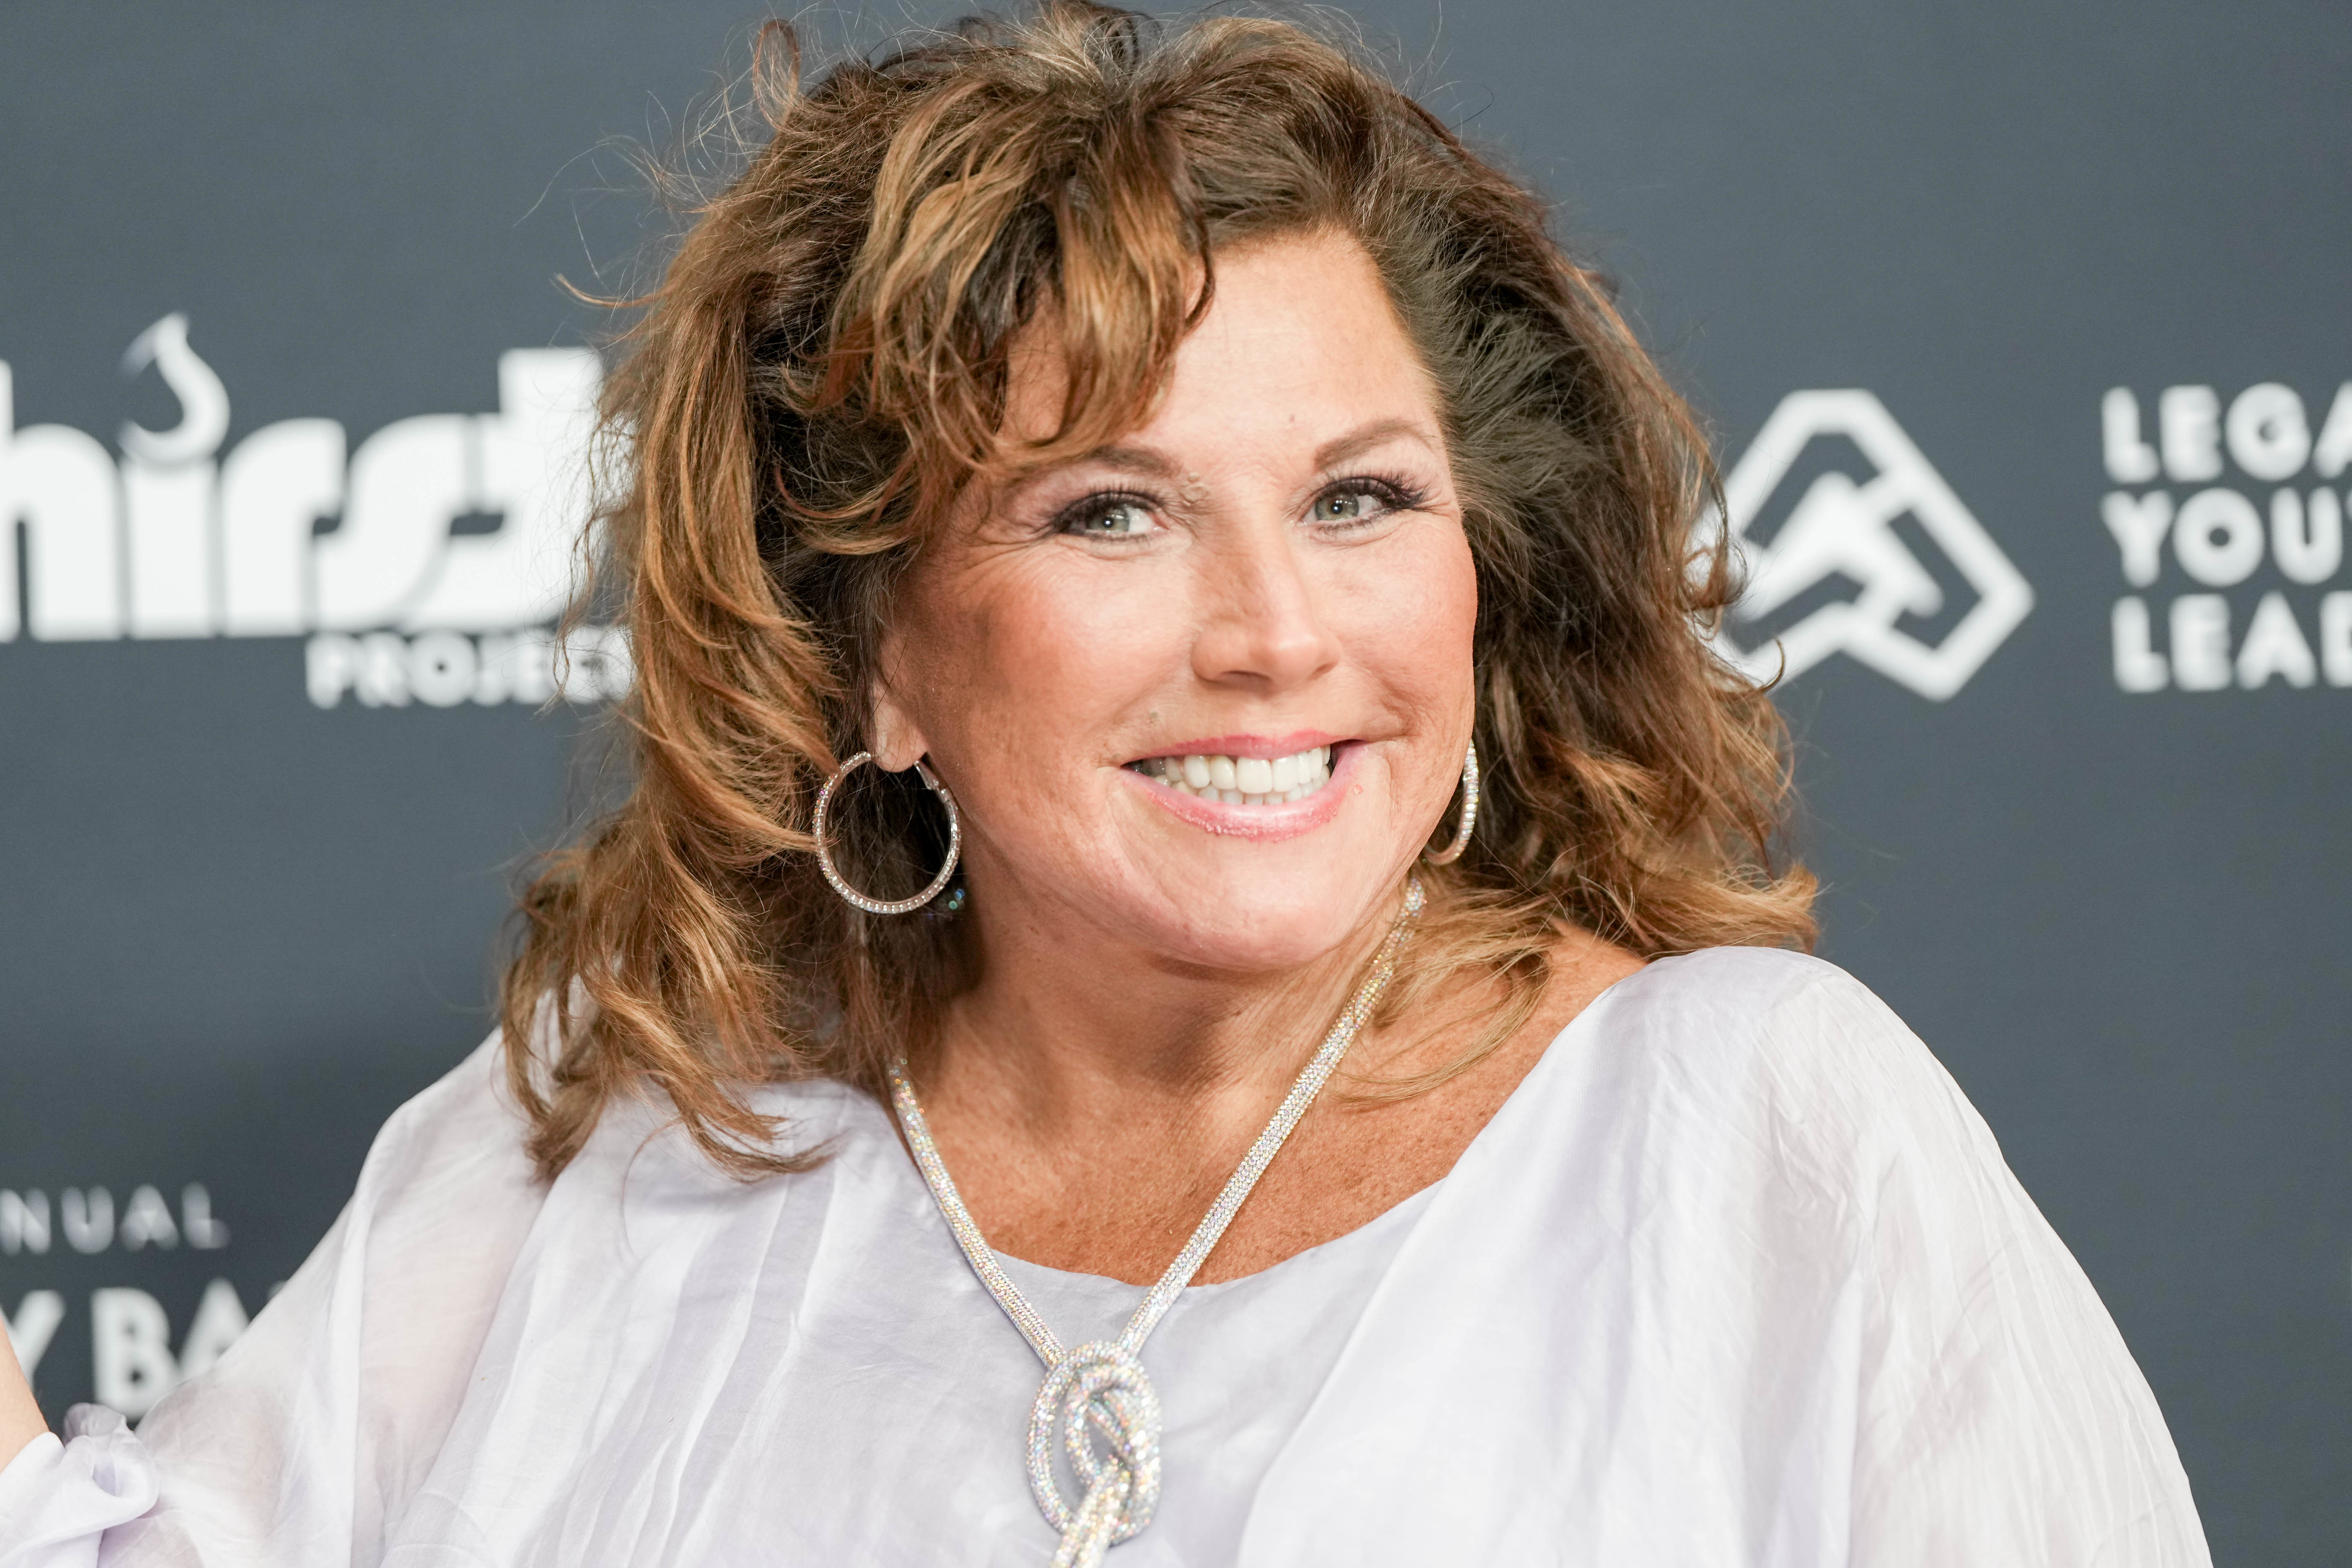 Abby Lee Miller smiling in a white blouse with large earrings and a necklace